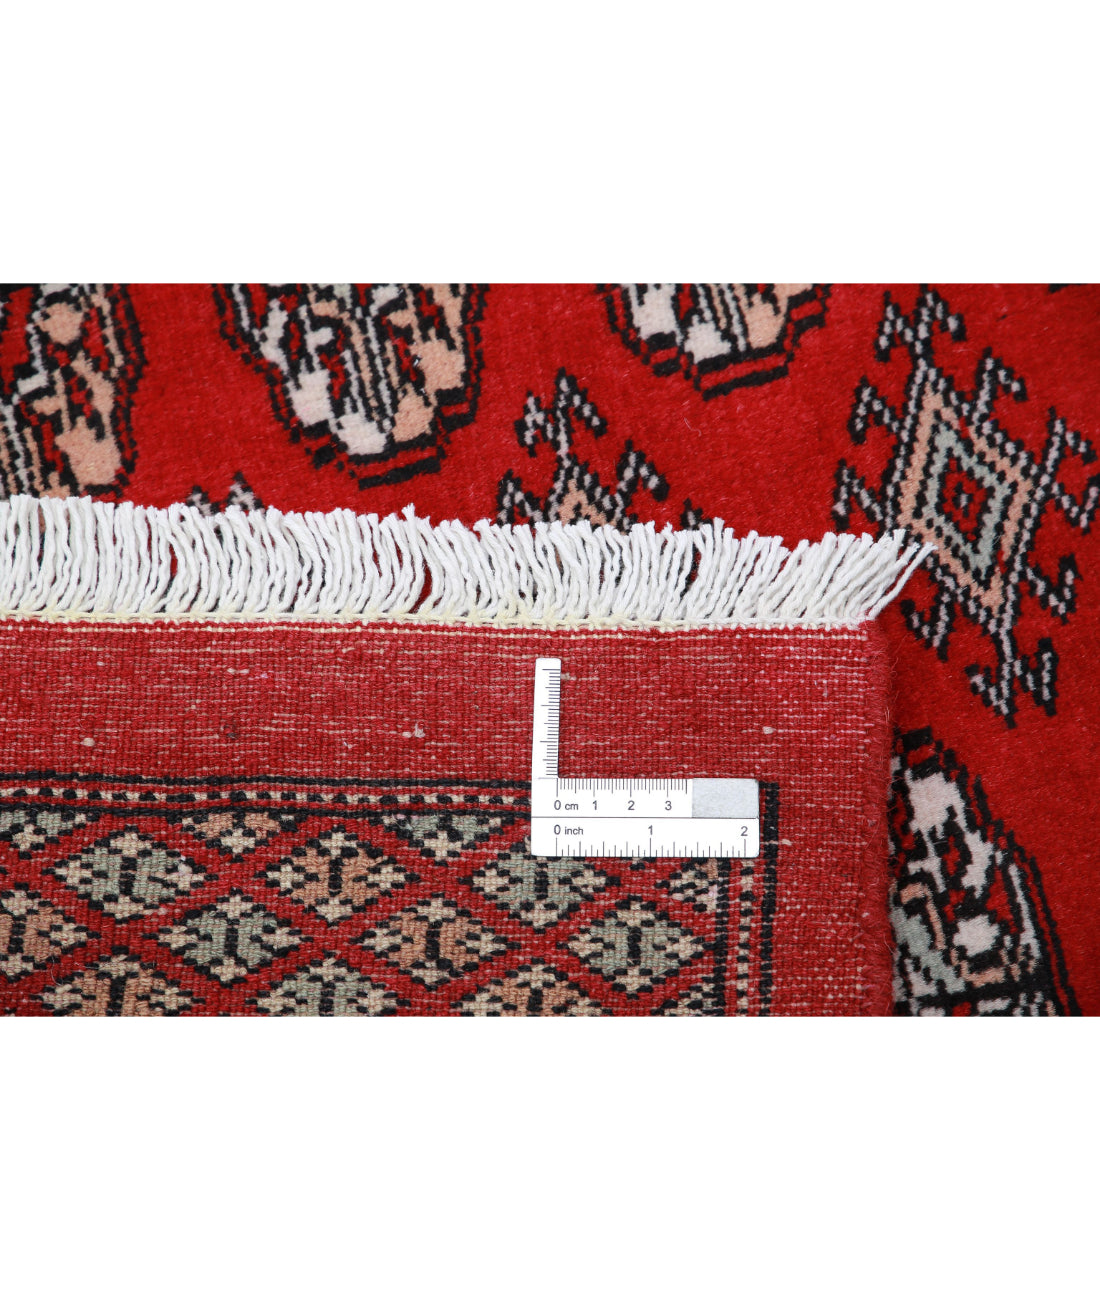 Hand Knotted Tribal Bokhara Wool Rug - 5'10'' x 8'6'' 5'10'' x 8'6'' (175 X 255) / Red / Black